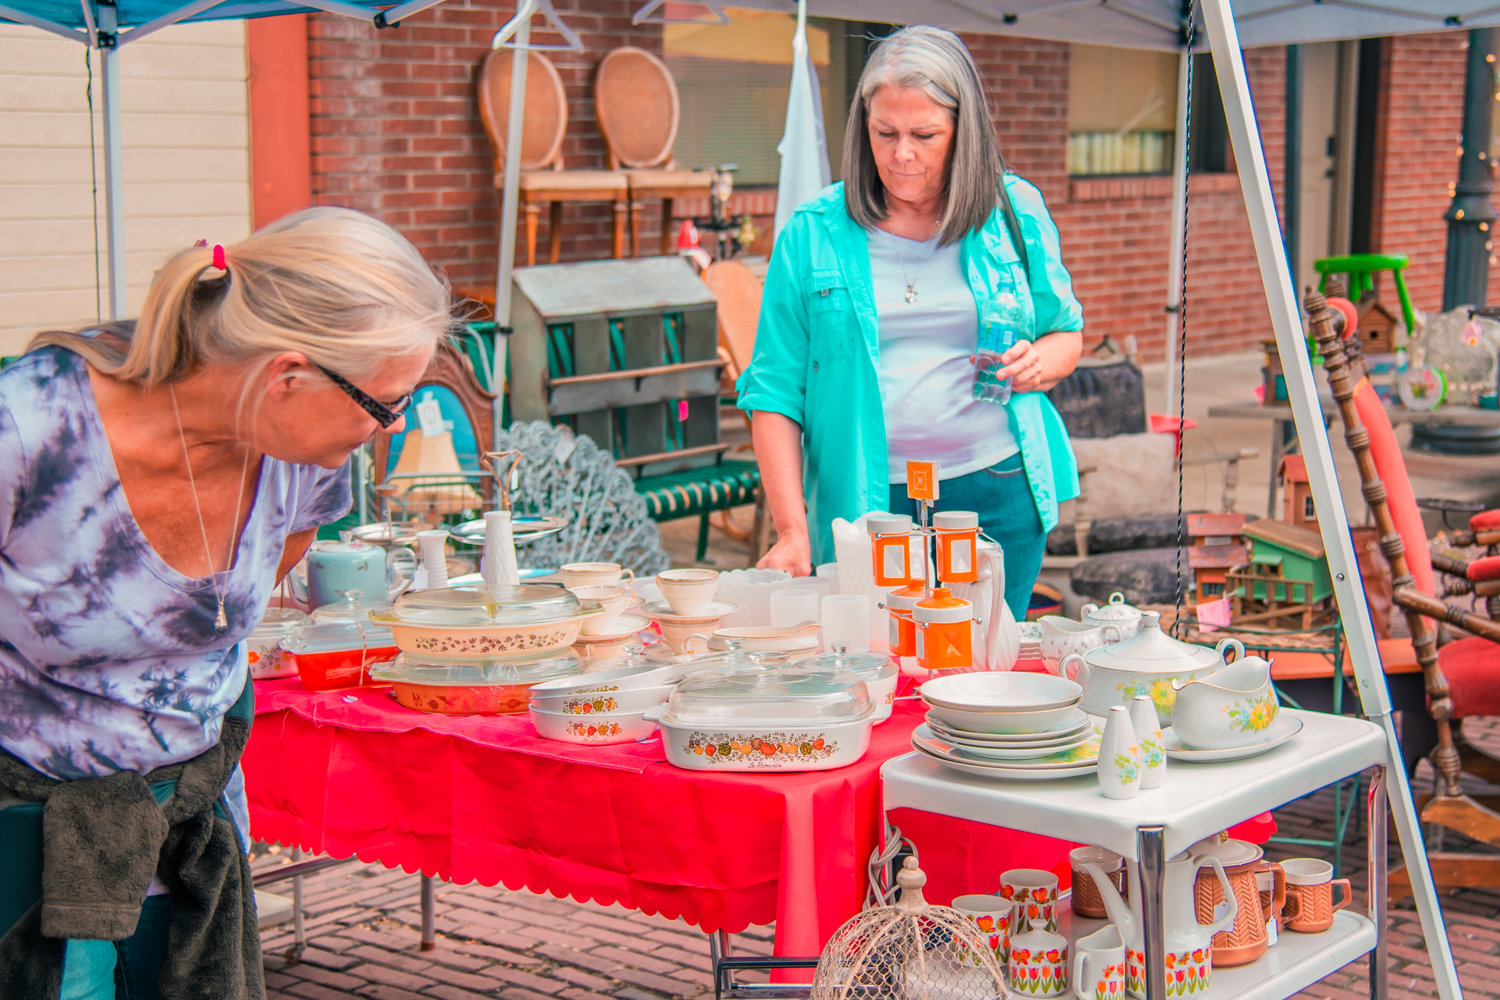 Visitors walk under canopies from different vendors containing a variety of items from tableware to furniture during Antique Fest in downtown Centralia on Friday.